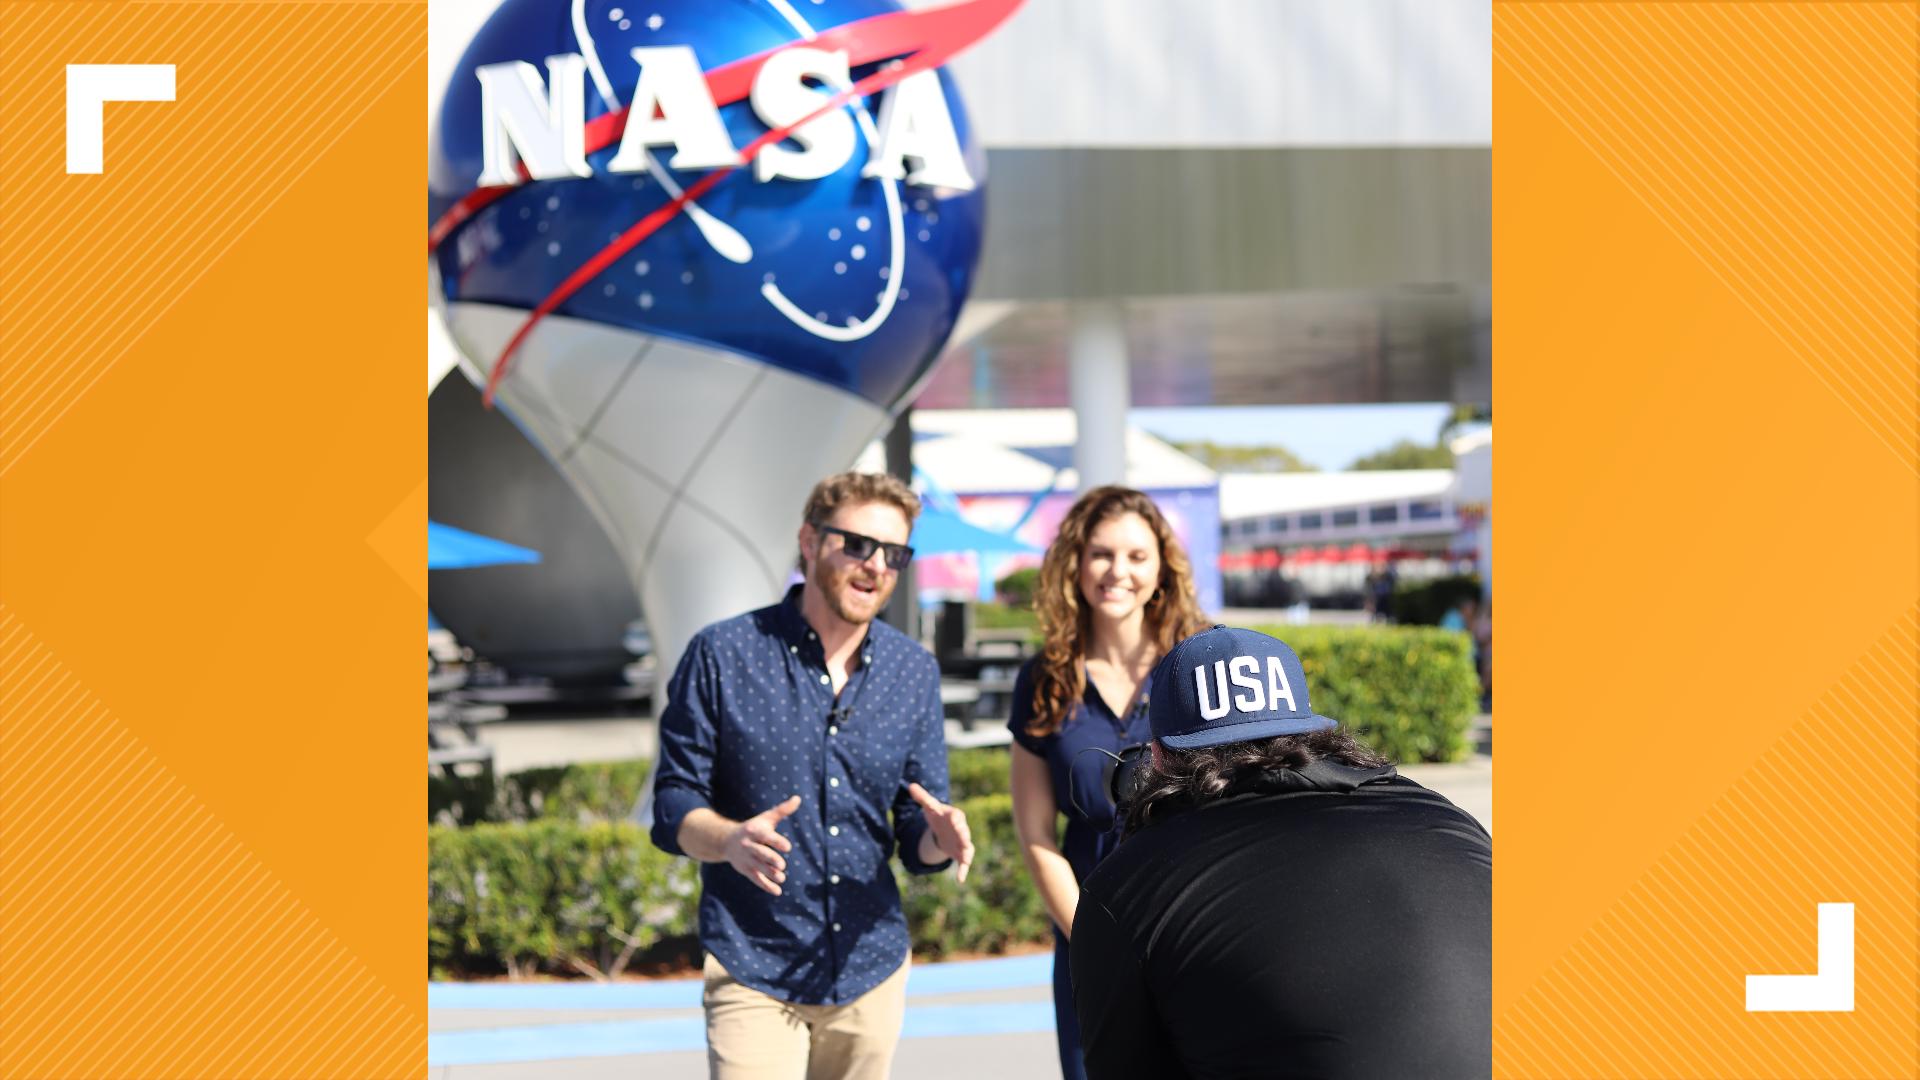 Jordan and David will take you to the Kennedy Space Center Visitor Complex at Cape Canaveral for an unforgettable experience.